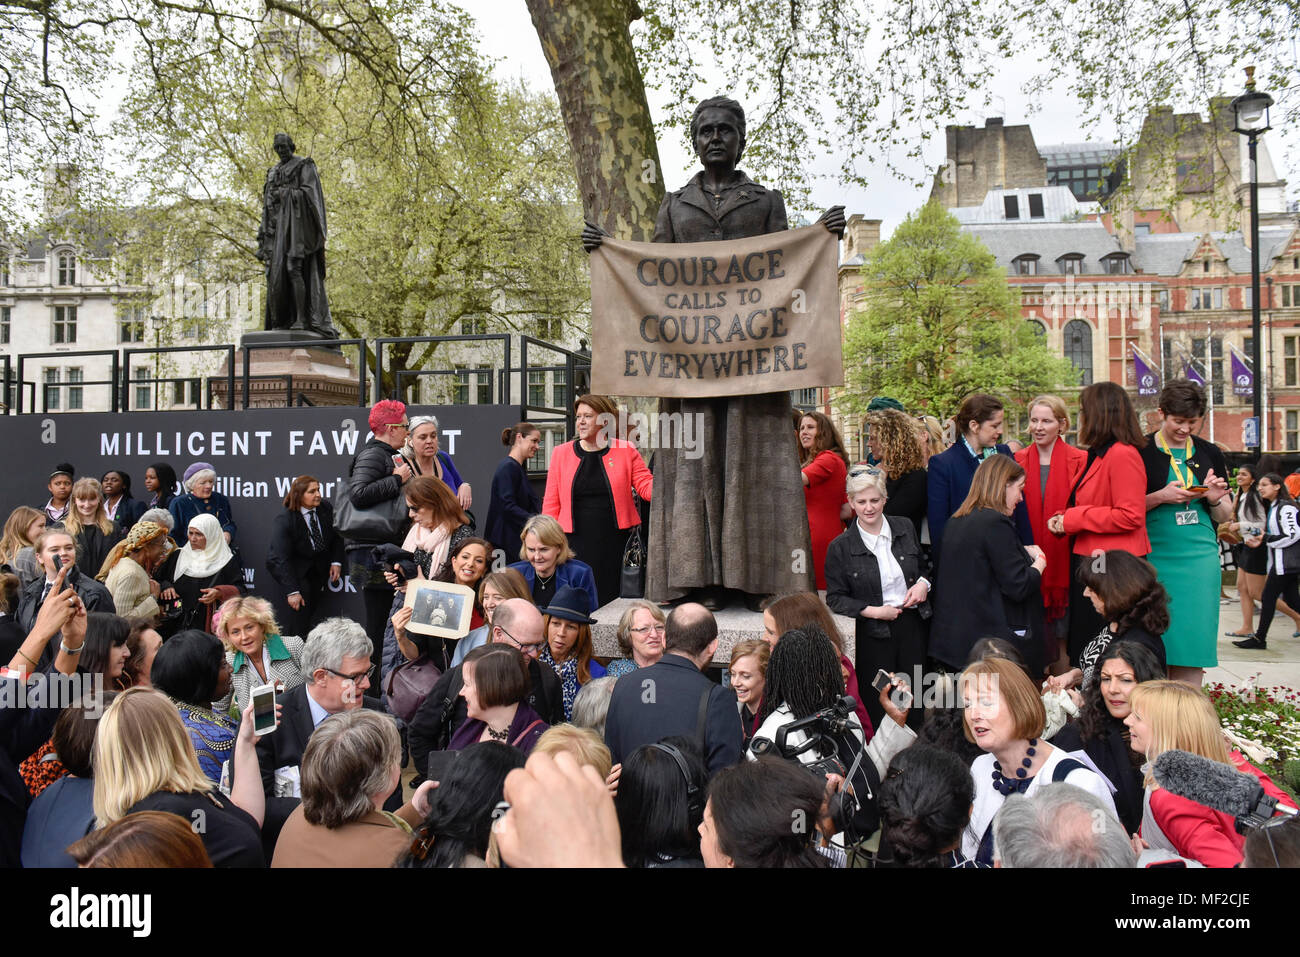 London, UK.  24 April 2018. Members of the audience take photos at the unveiling of a statue of suffragist Millicent Fawcett in Parliament Square.  The bronze casting, created by artist Gillian Wearing, shows a banner reading the text 'courage call to courage everywhere', is the first statue of a woman to be erected in Parliament Square and was commissioned as part of this year's centenary of the 1918 Representation of the People Act, giving some women aged over 30 the right to vote.  Credit: Stephen Chung / Alamy Live News Stock Photo